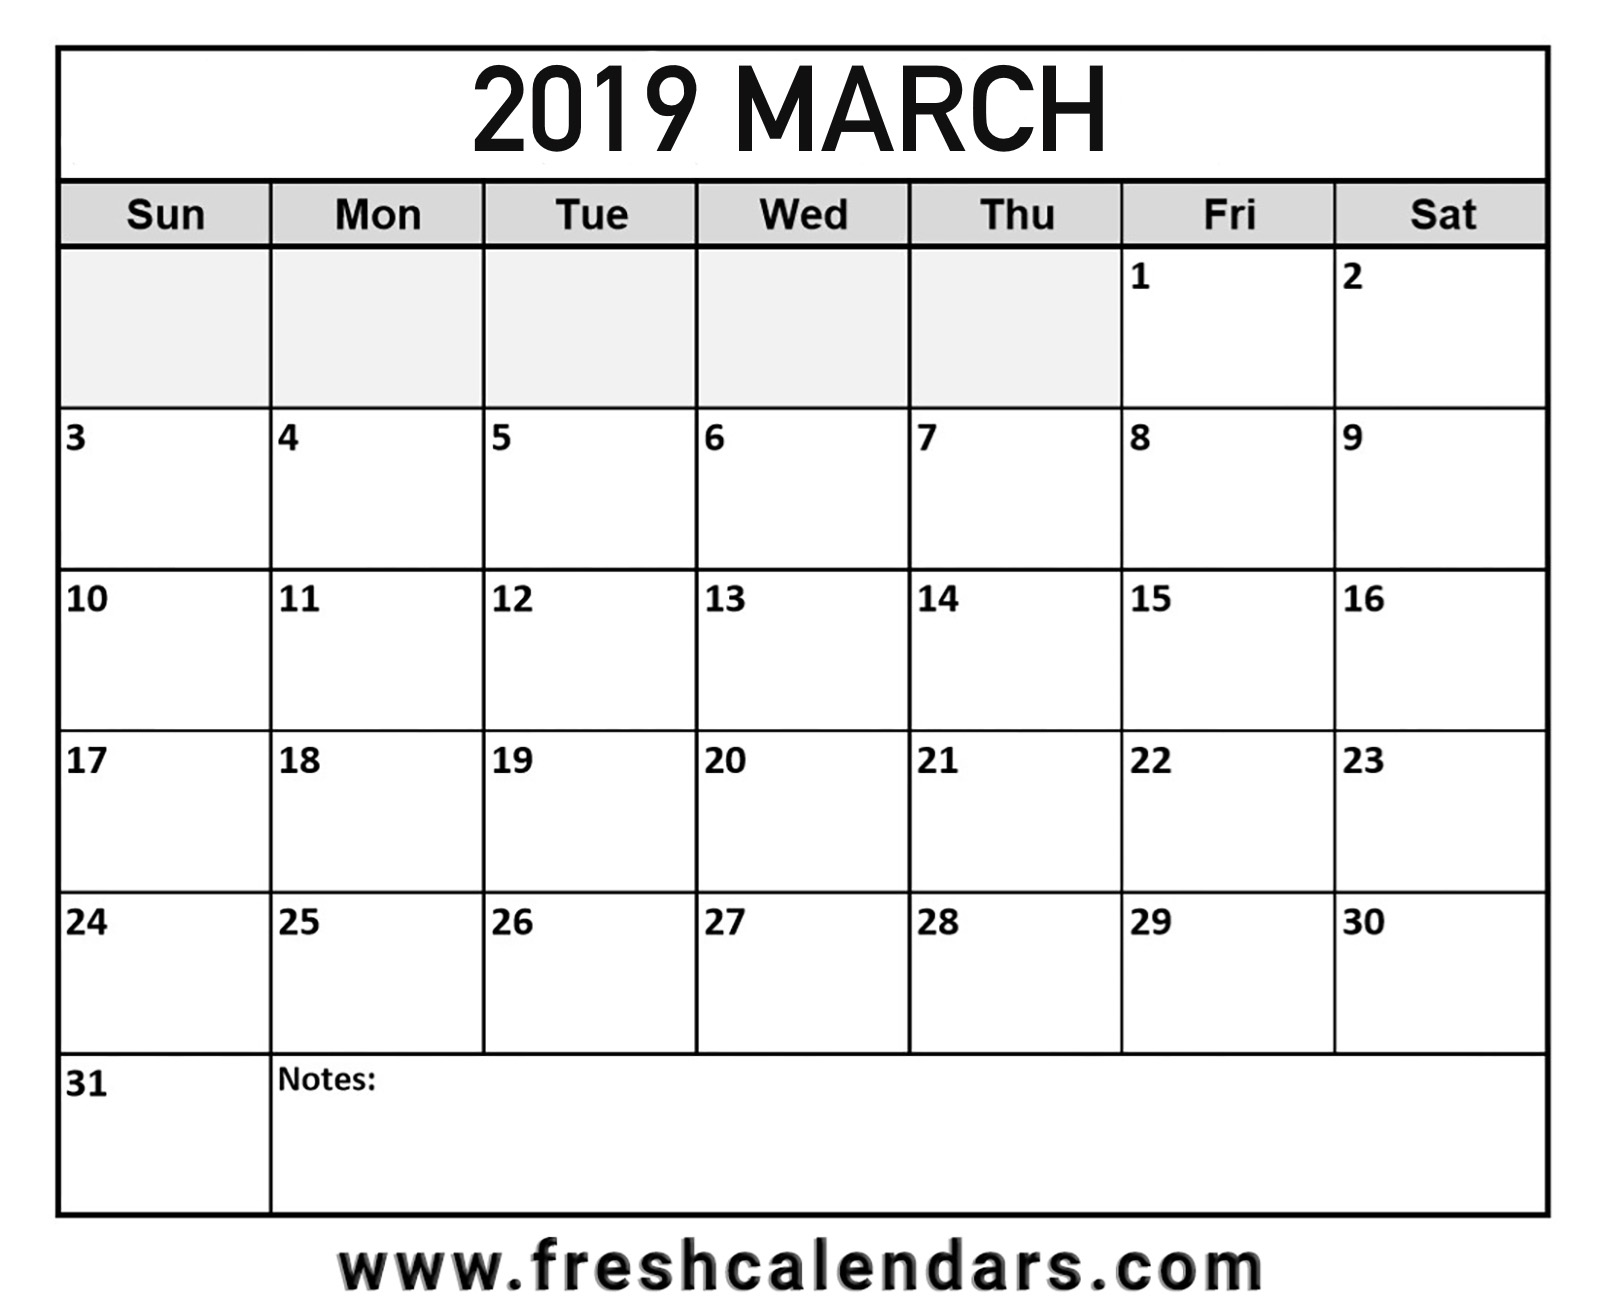 March Calendar 2019 with Notes Space